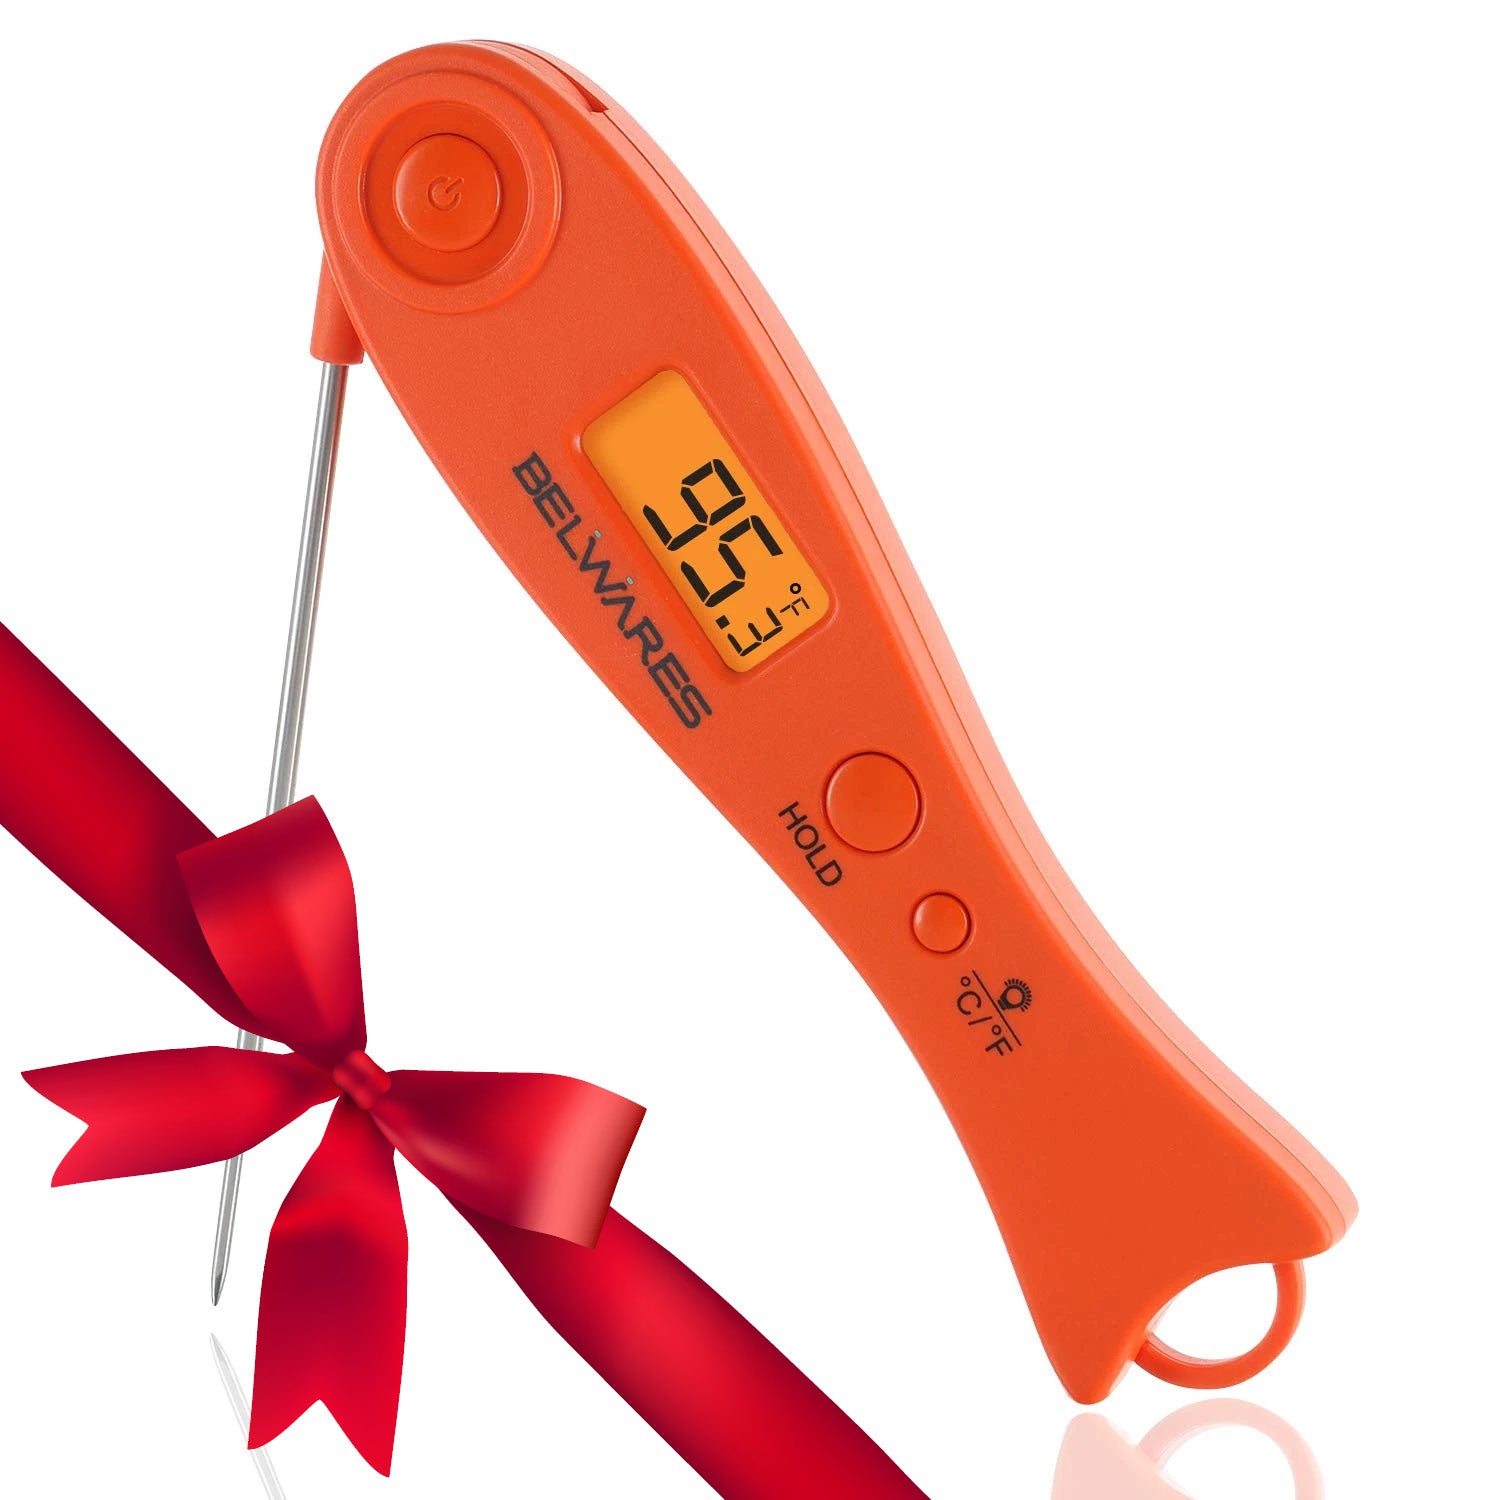 Royal Gourmet Instant Read Meat Food Thermometer, Waterproof Digital Kitchen  Cooking Food Foldable Probe, Red, TW2002 at Tractor Supply Co.